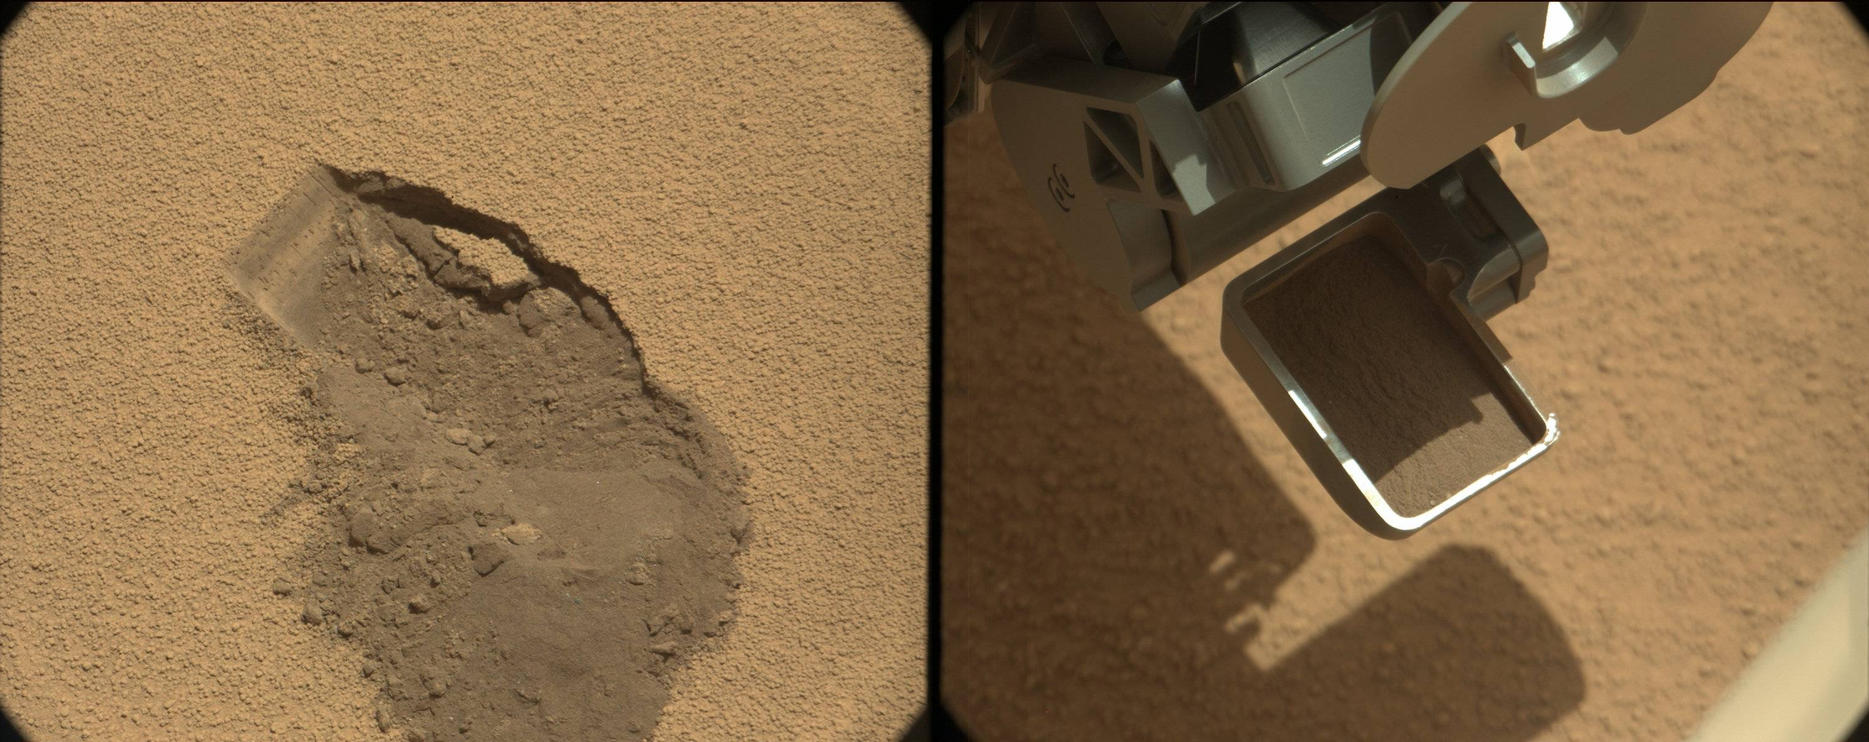 First Scoop by Curiosity, Sol 61 Views